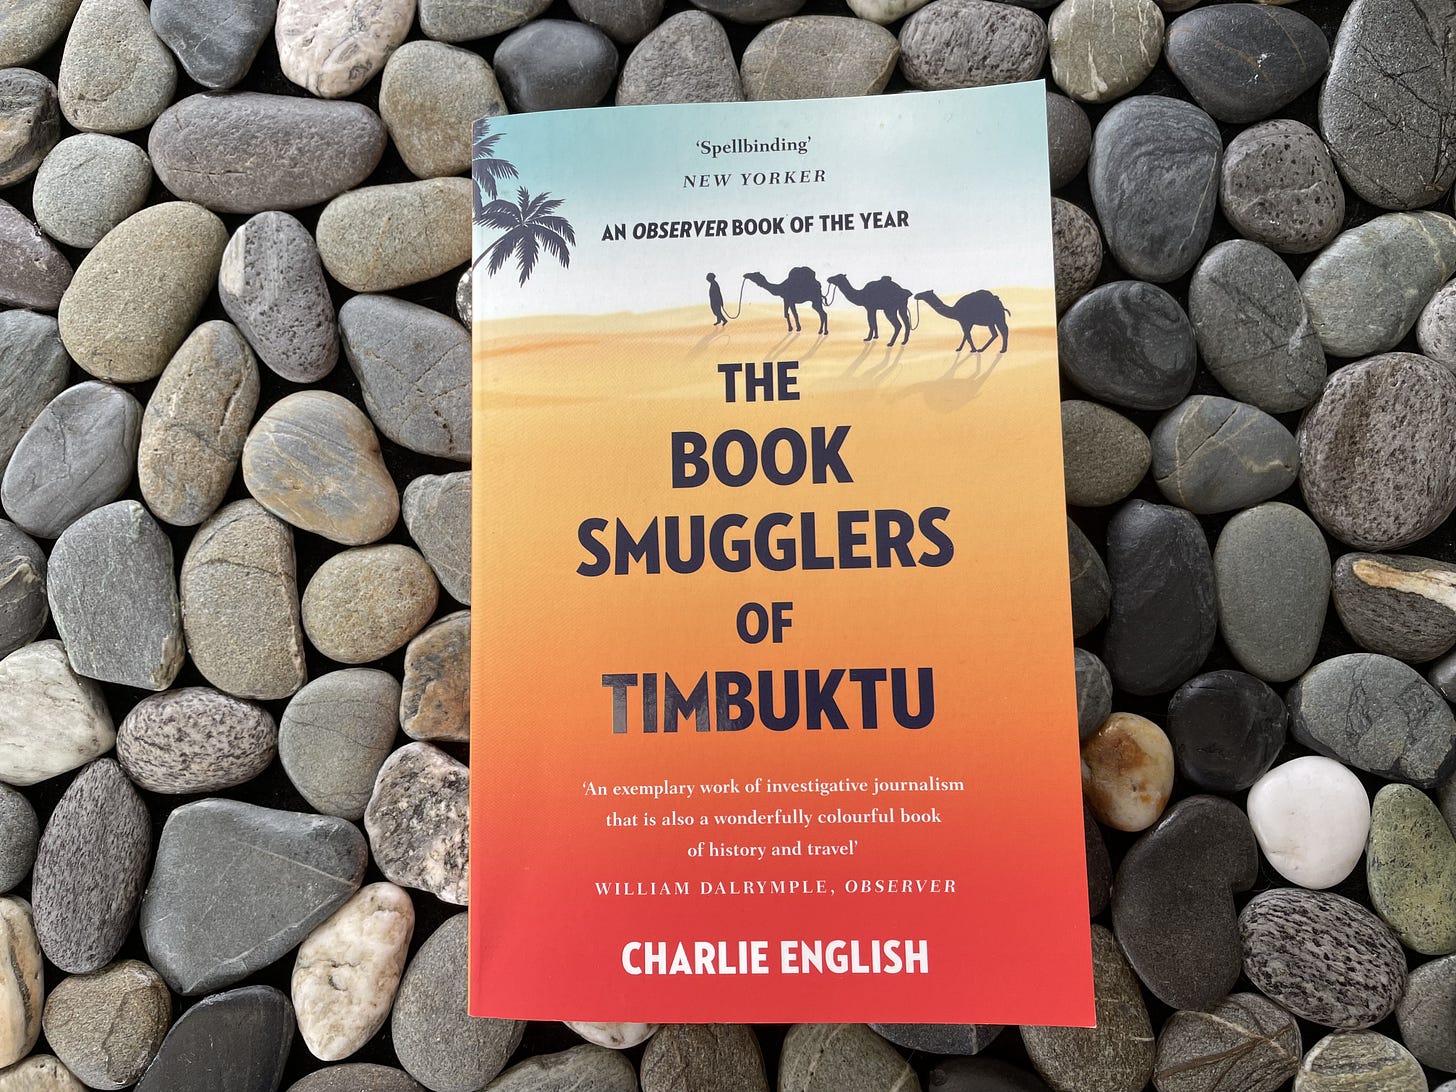 Cover of the book The Book Smugglers of Timbuktu set against a background of stones